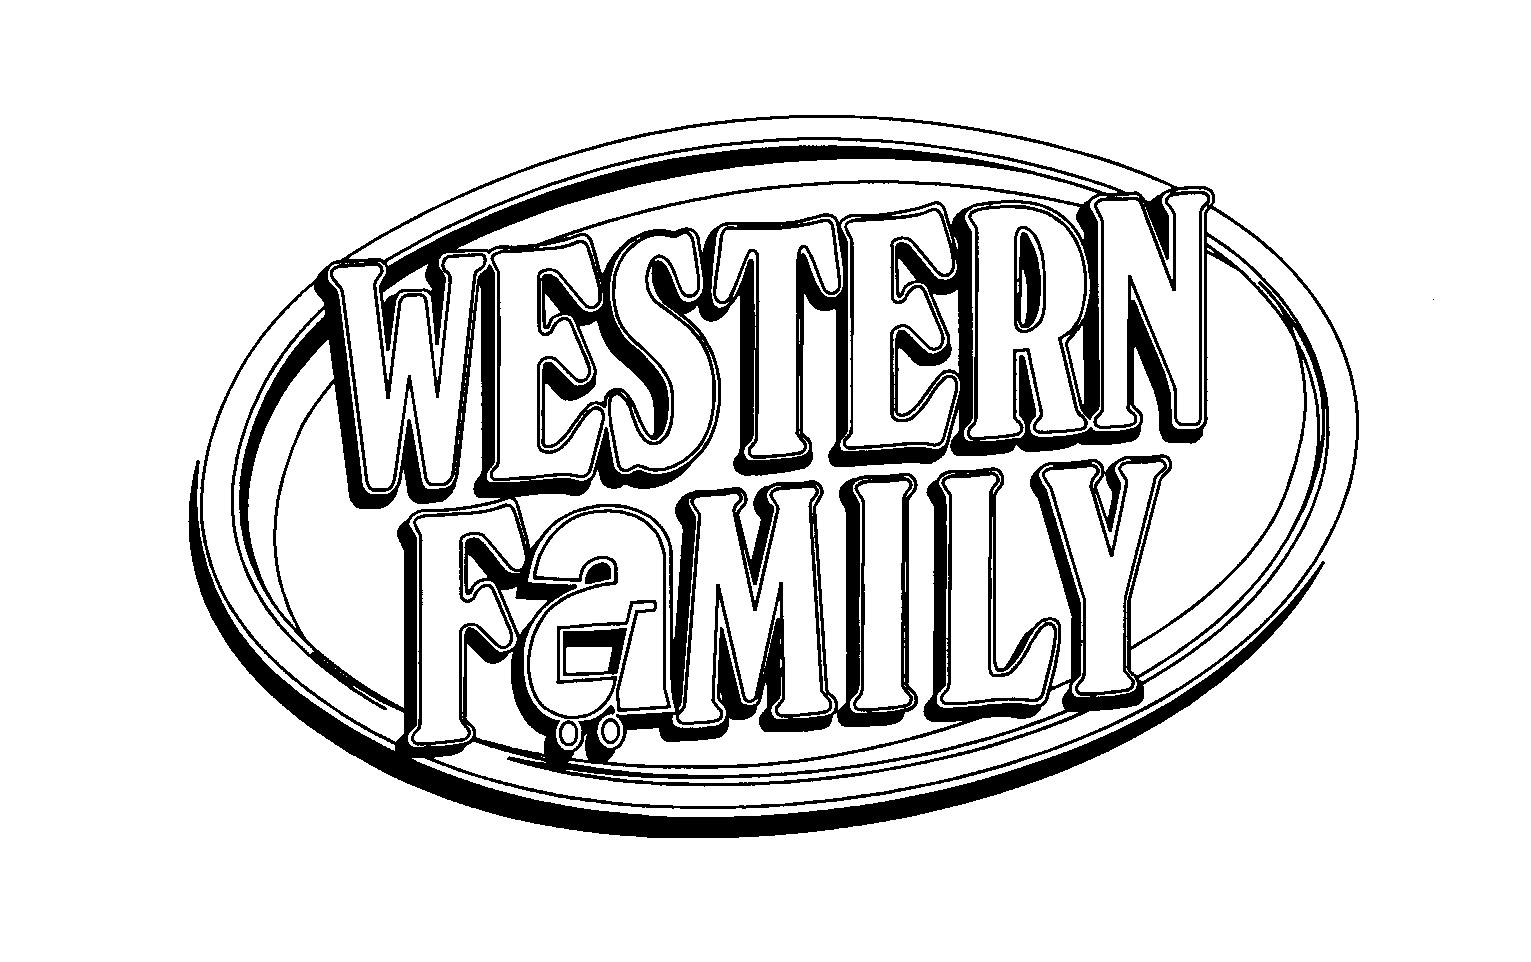 WESTERN FAMILY